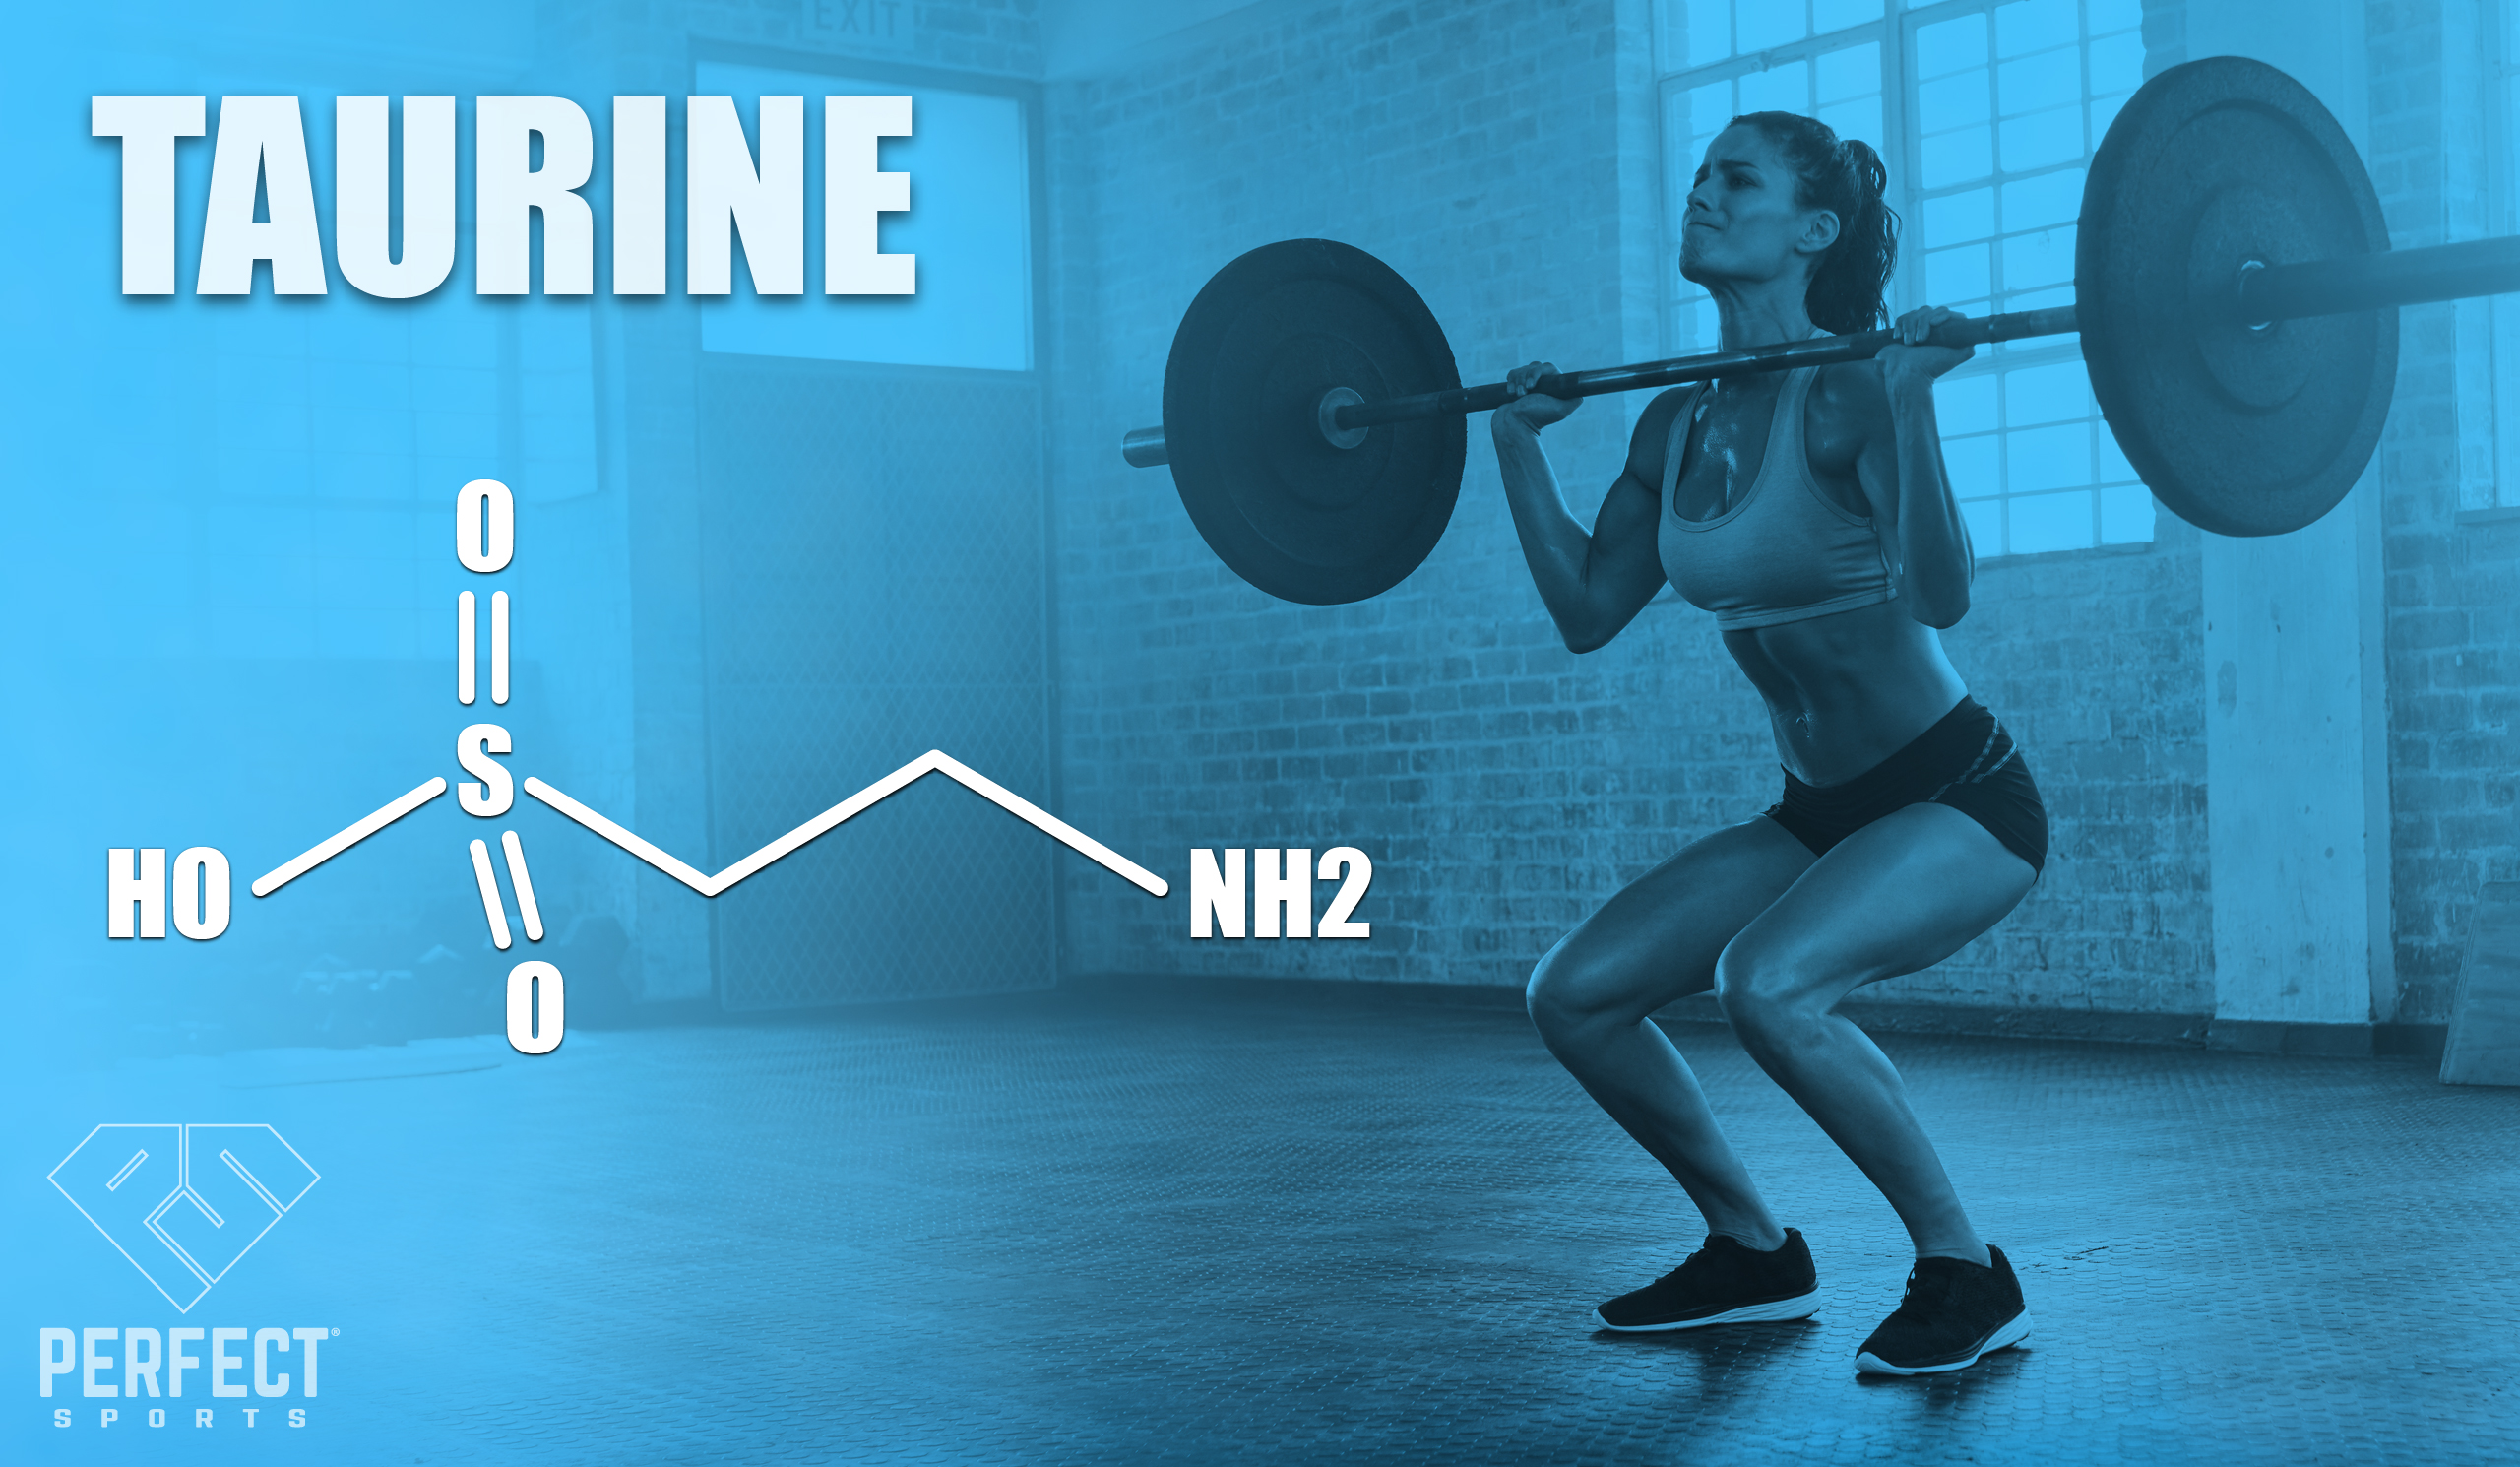 Taurine Text in white with Taurine Chemical Structure in White. Female lifting in background with blue tint over entire image. PERFECT Sports Taurine Article Banner.